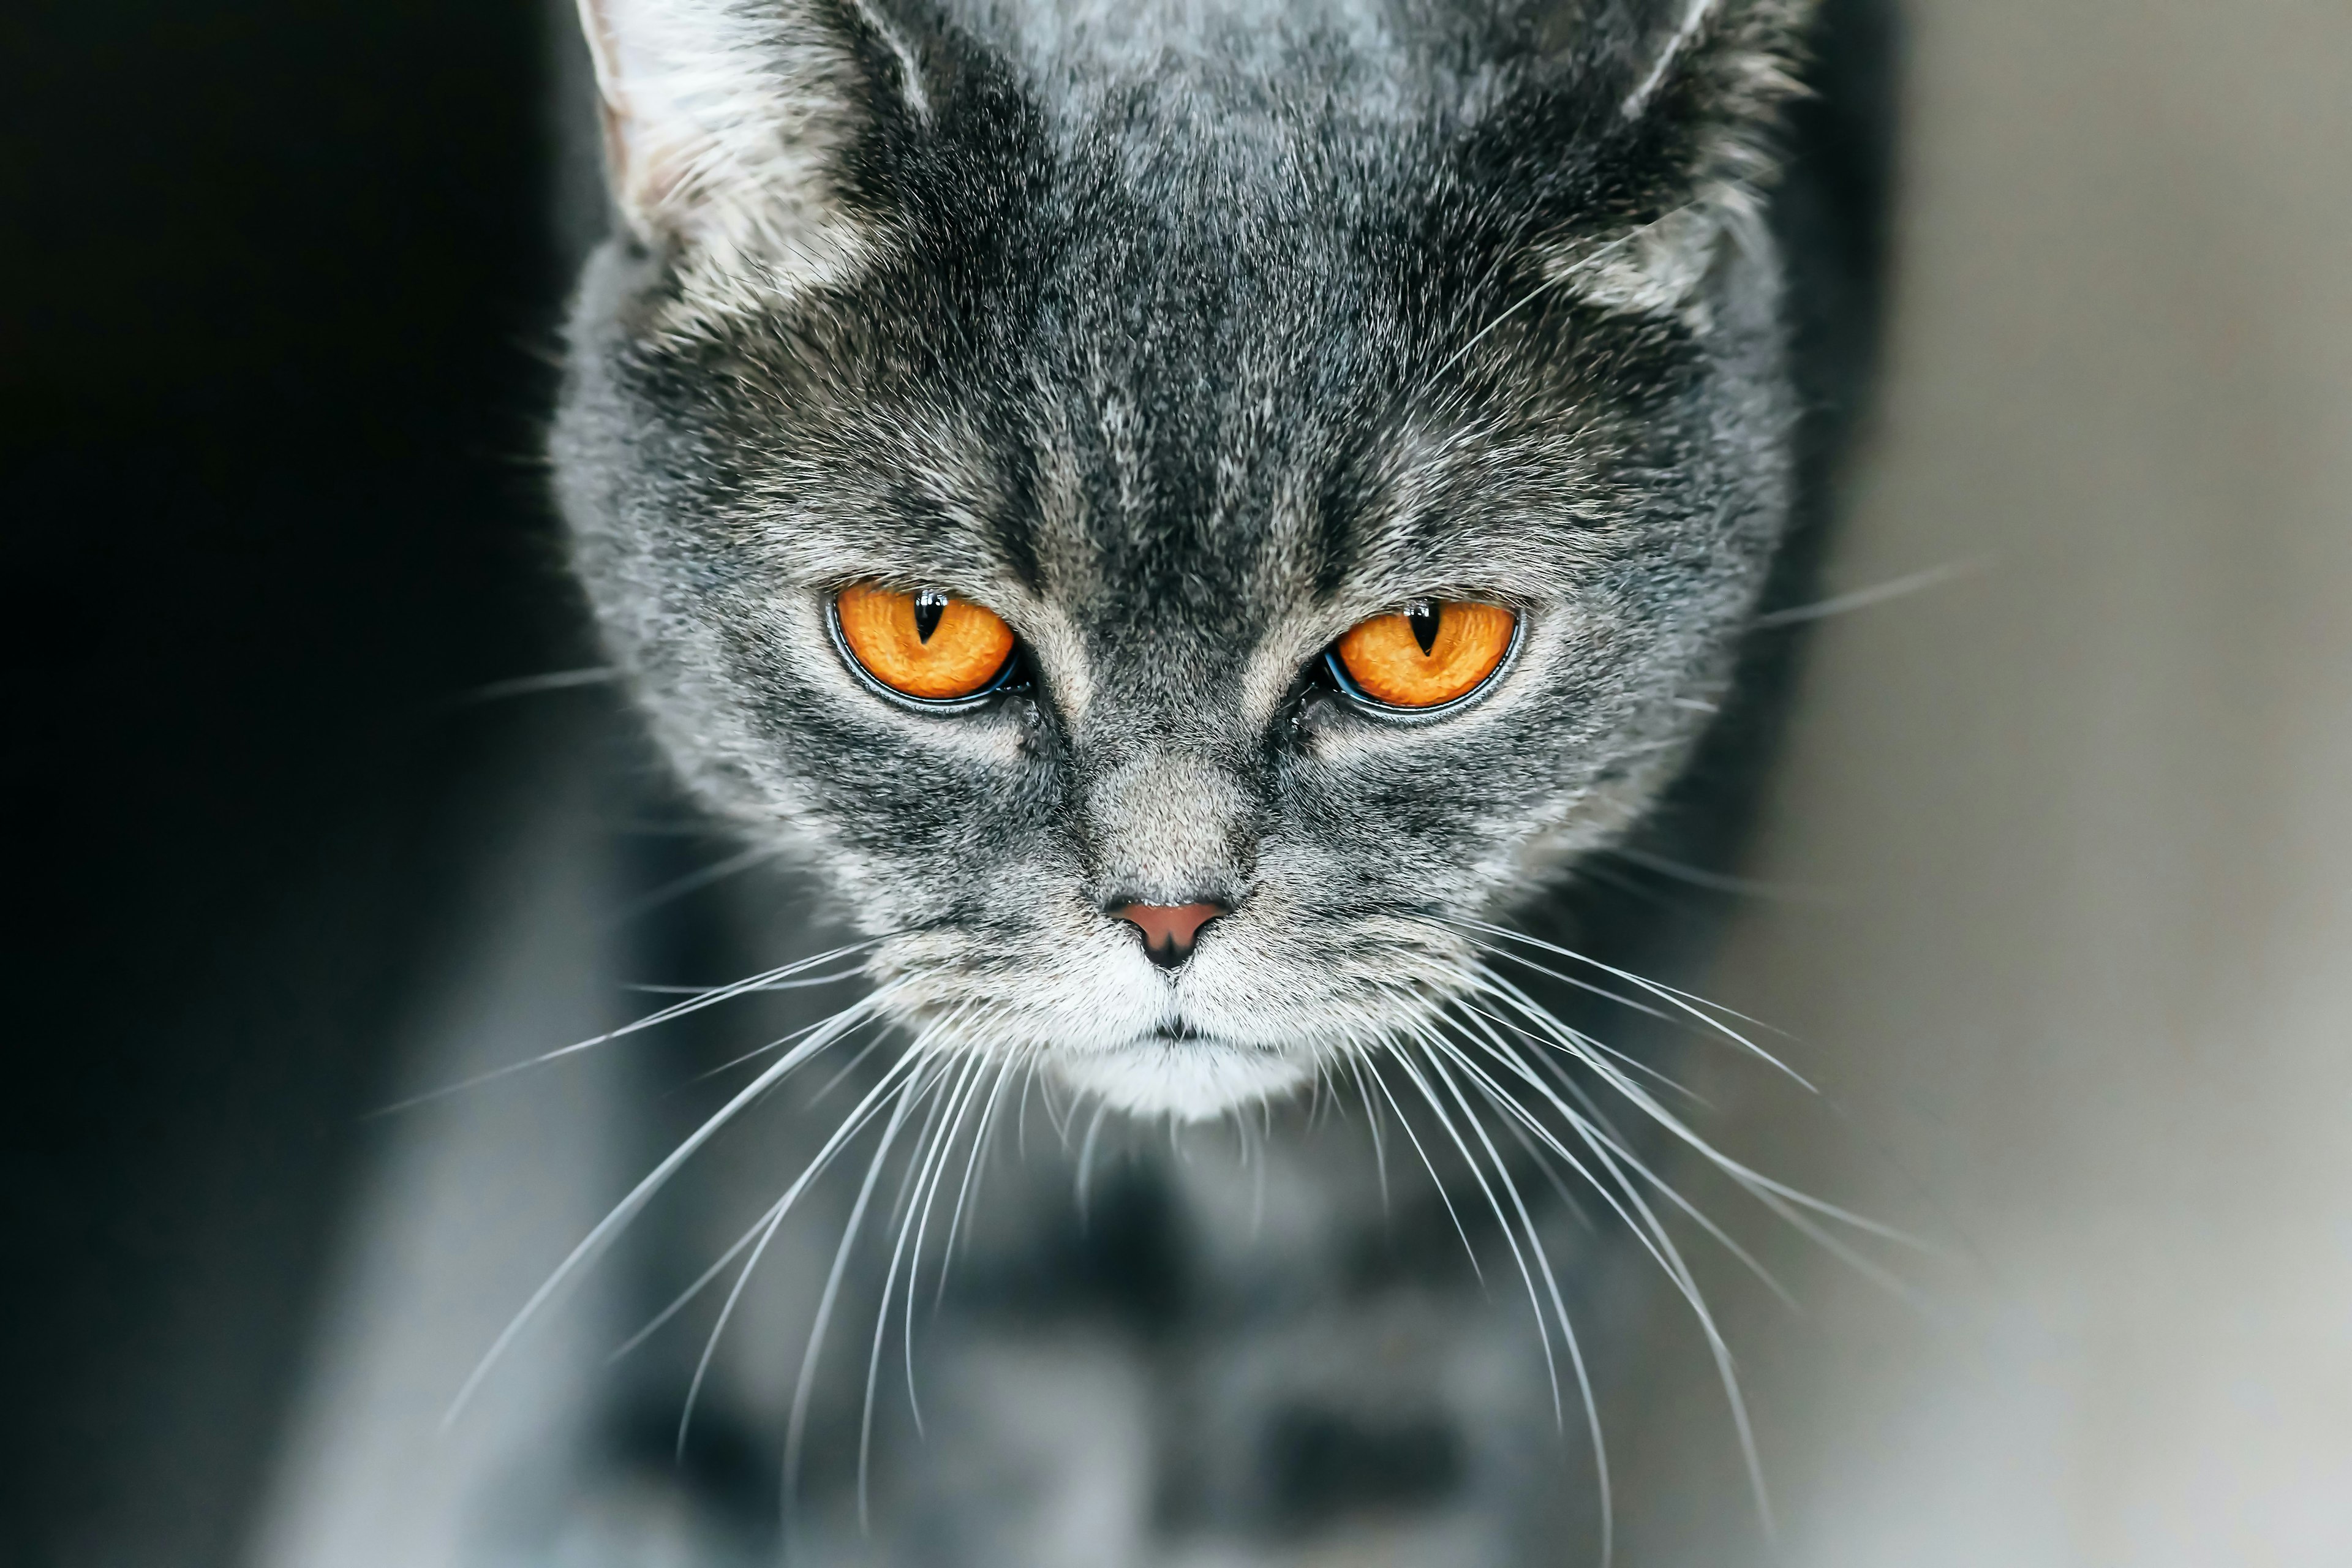 A gray cat with orange eyes